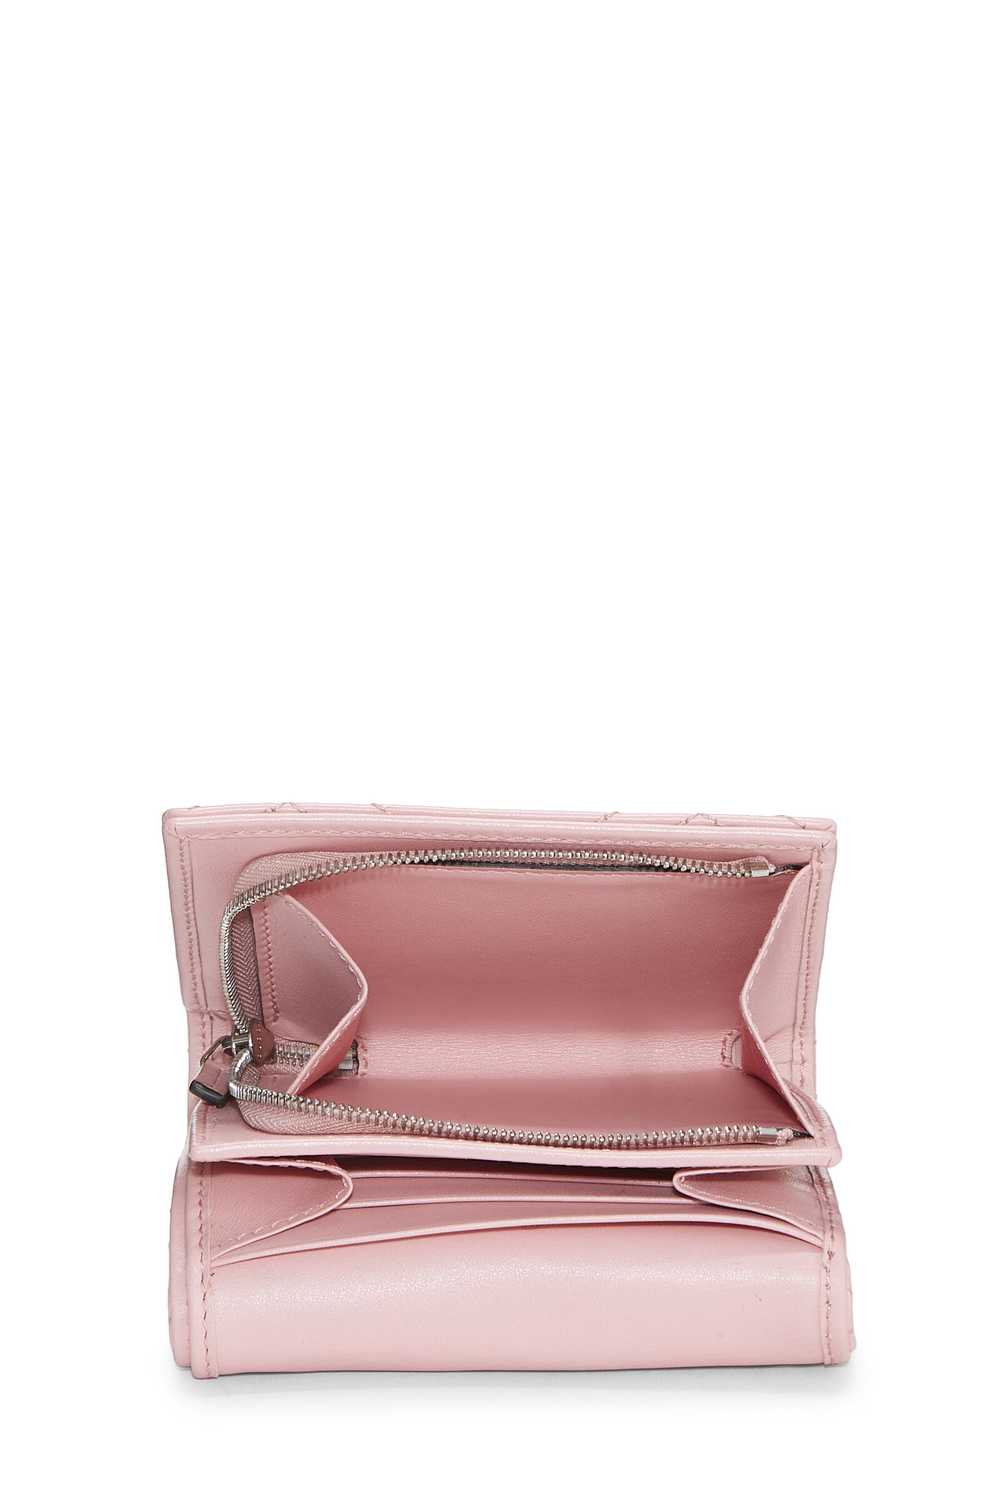 Pink Leather GG Marmont Card Case - image 4